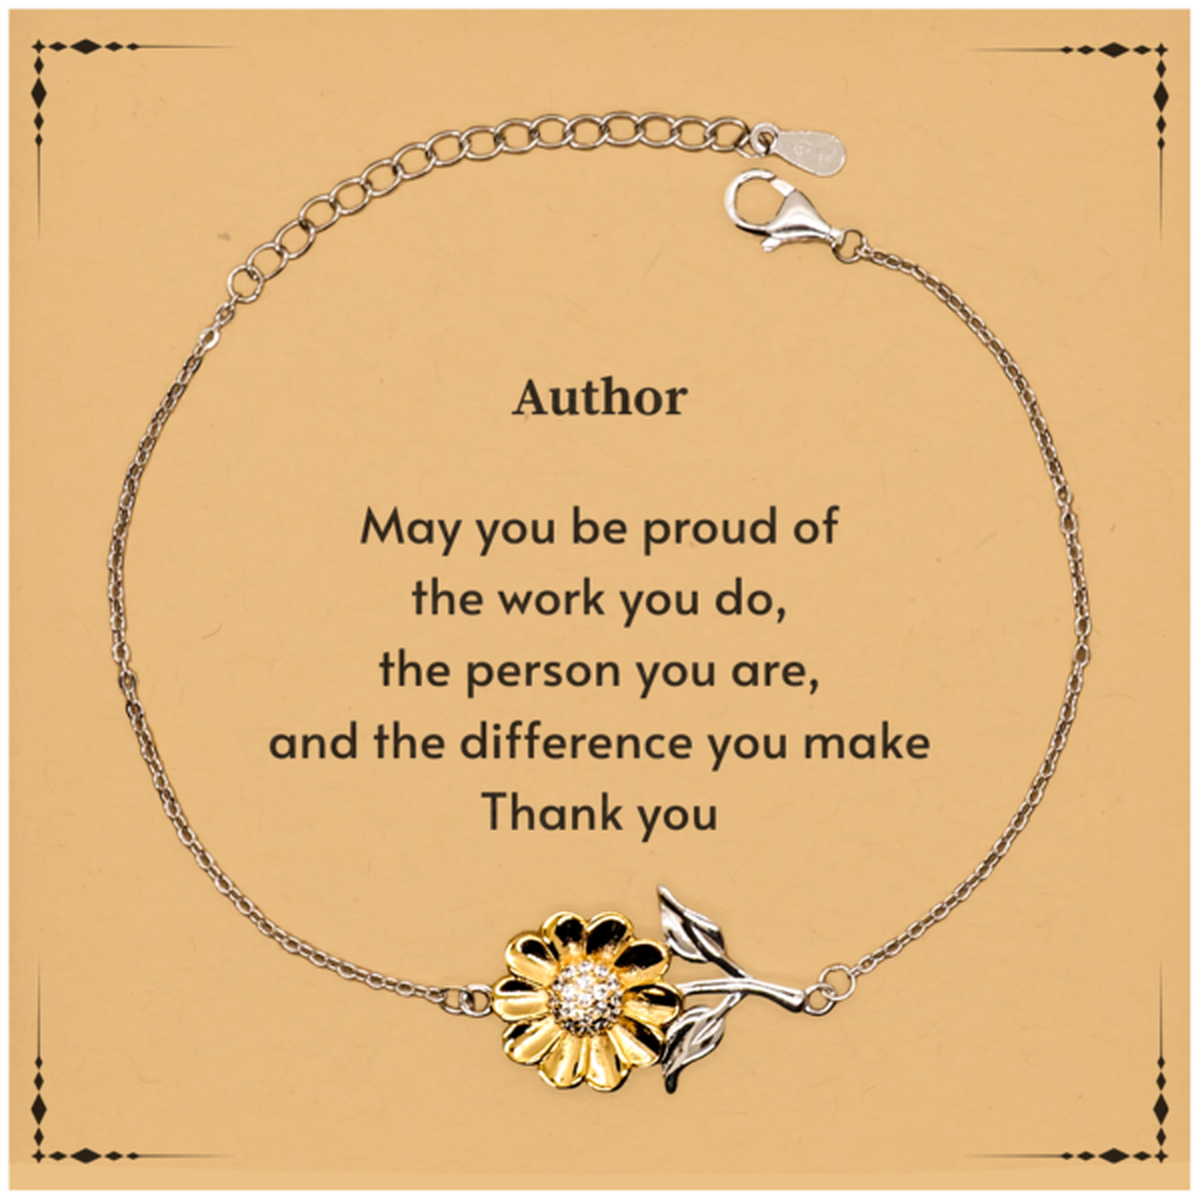 Heartwarming Sunflower Bracelet Retirement Coworkers Gifts for Author, Author May You be proud of the work you do, the person you are Gifts for Boss Men Women Friends